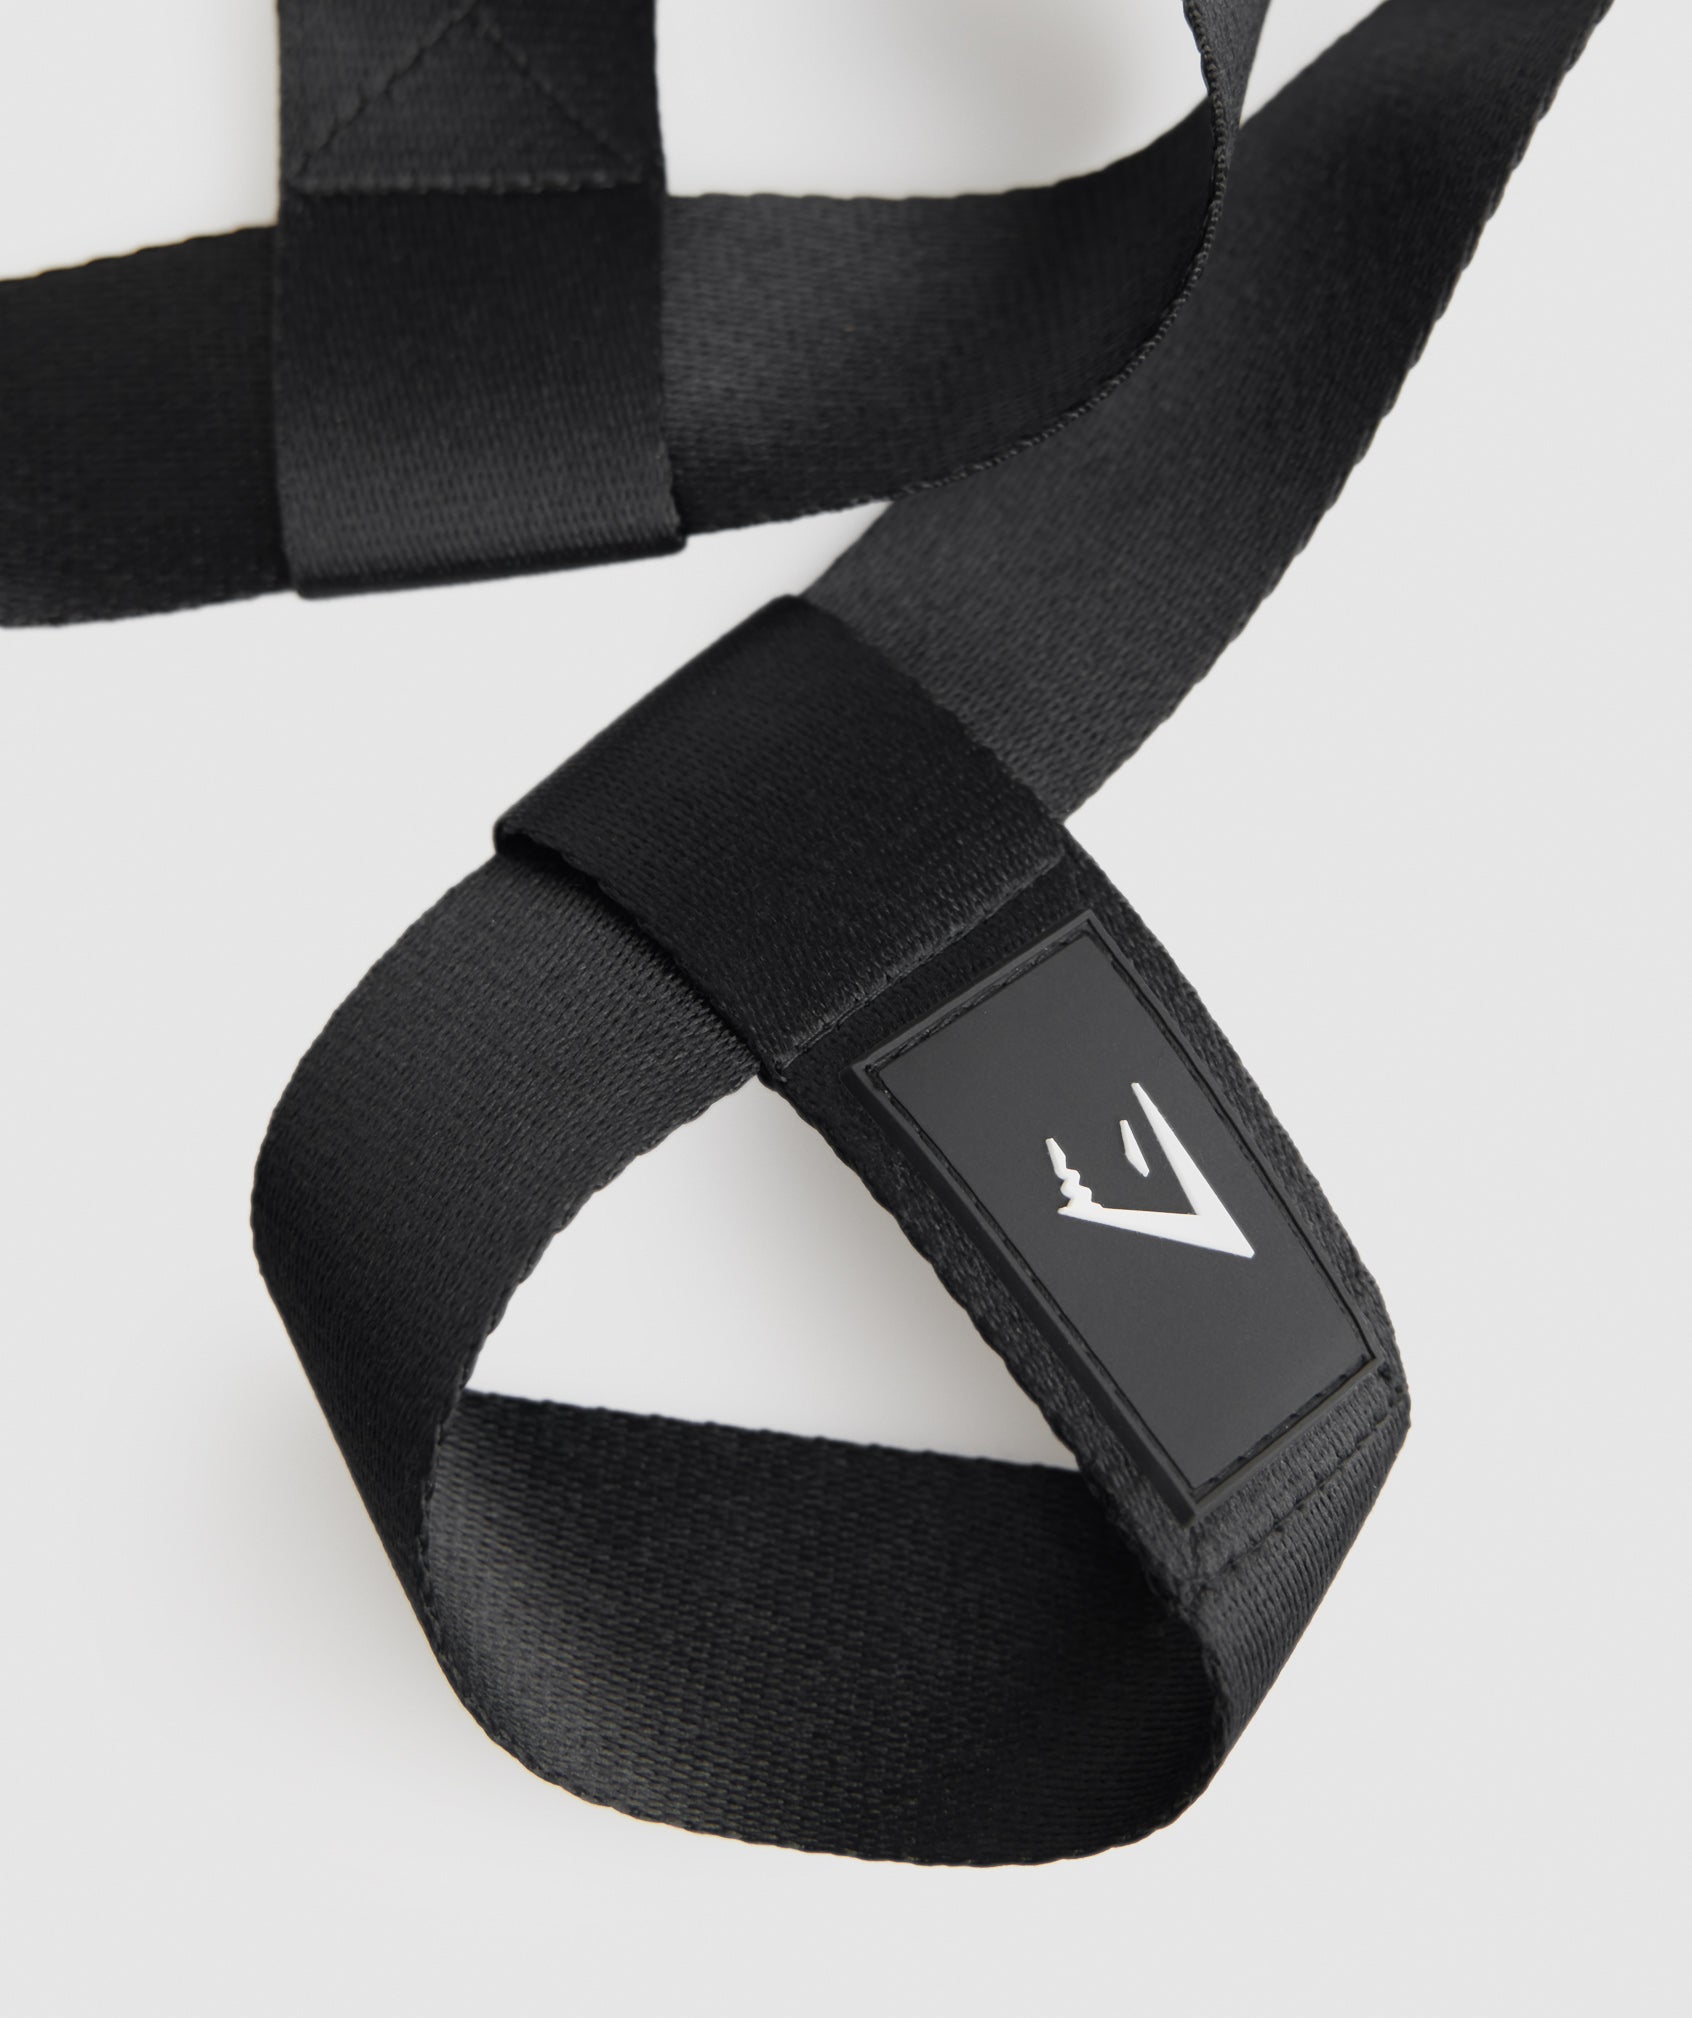 Studio Mat Strap and Band in Black